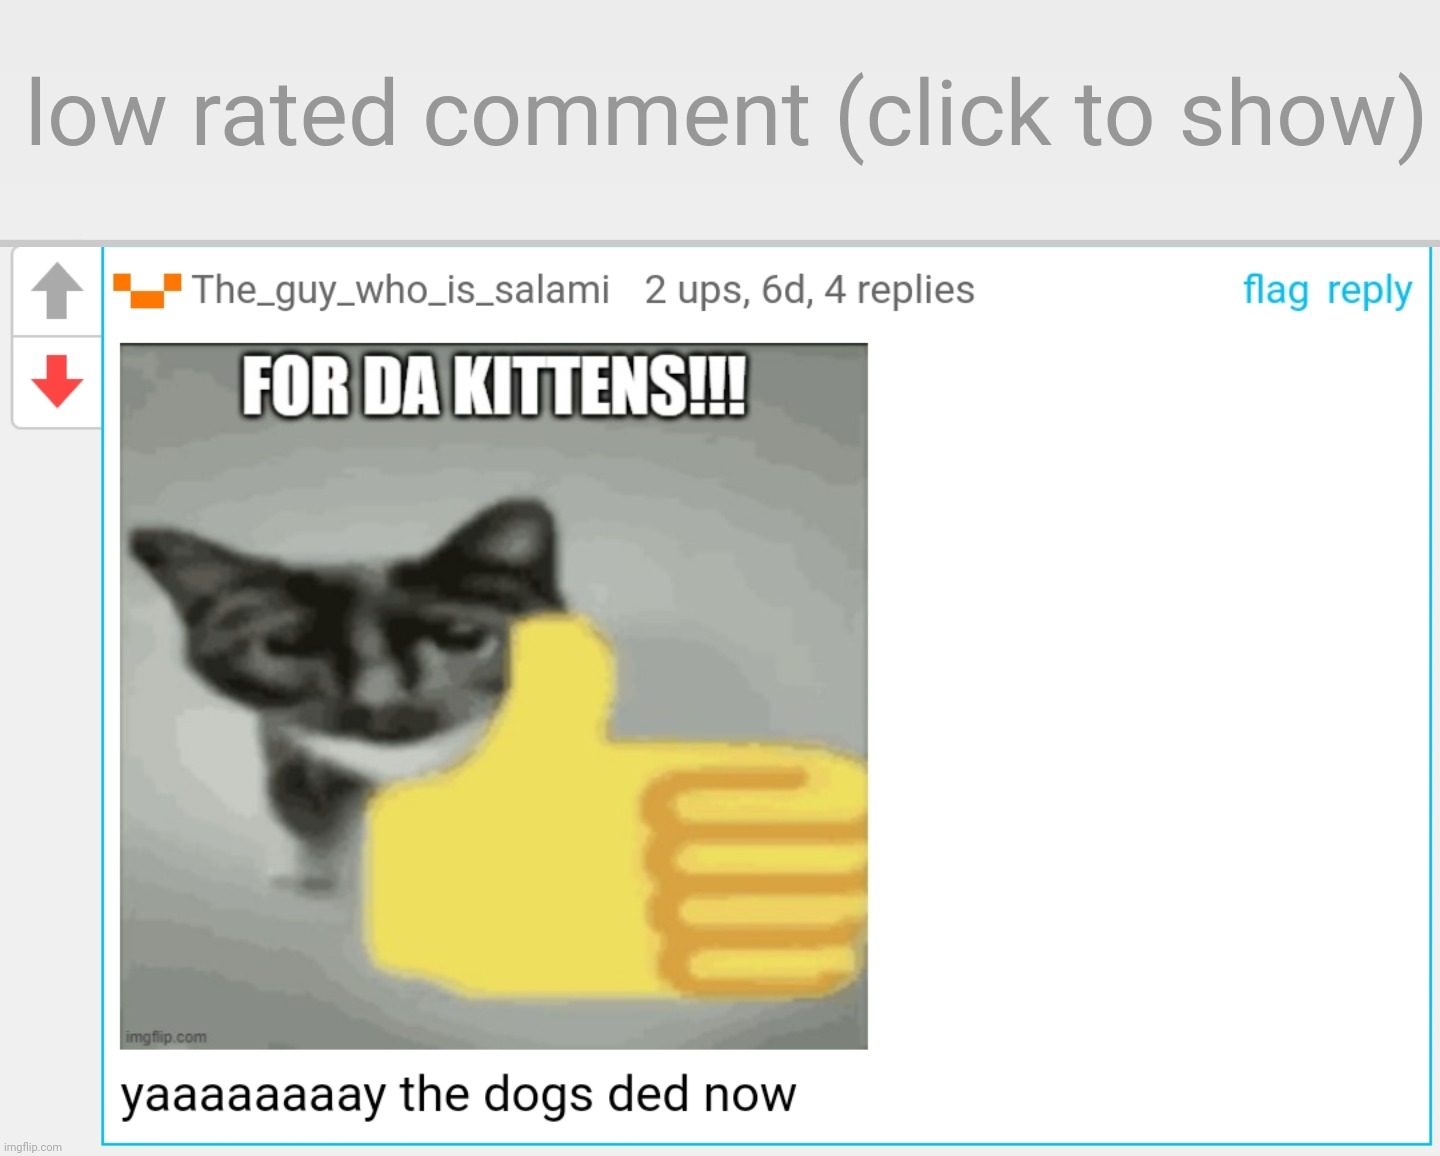 I don't know what to say to this guy... | image tagged in low-rated comment imgflip,dog hate,comments | made w/ Imgflip meme maker